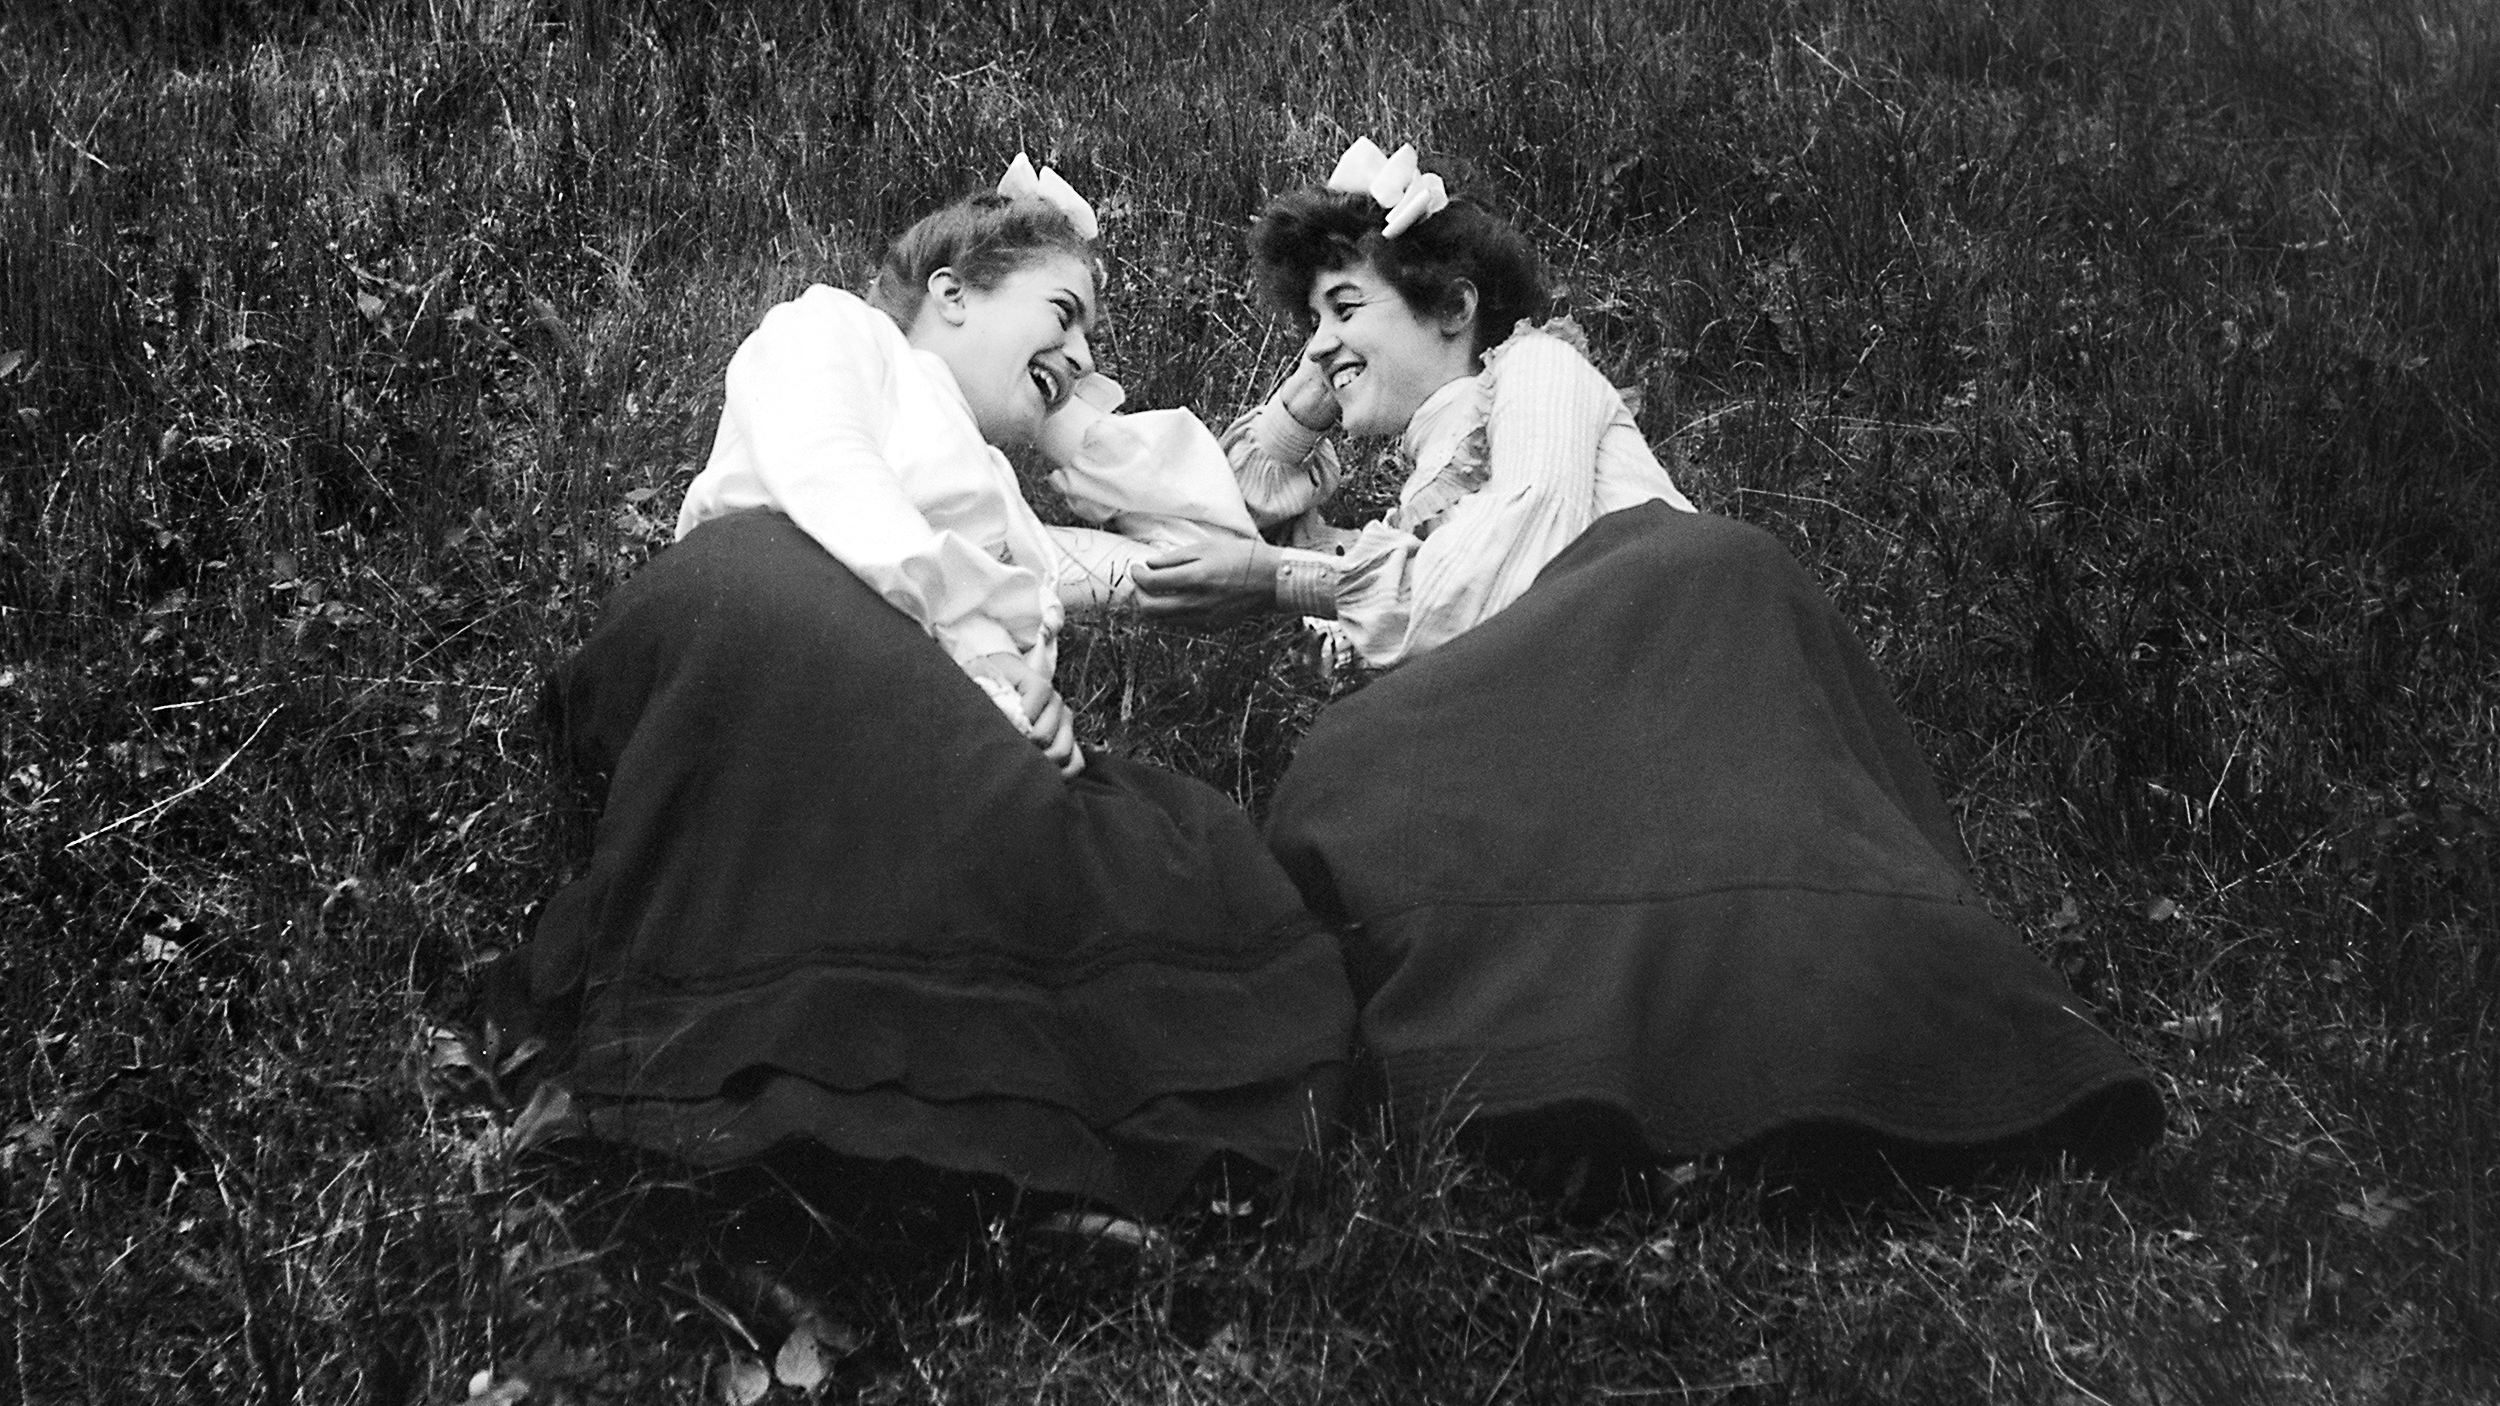 Two women in vintage clothing, wearing bows in their hair, engaging in a tend-and-befriend moment on a grassy field, lying facing each other, smiling and talking.